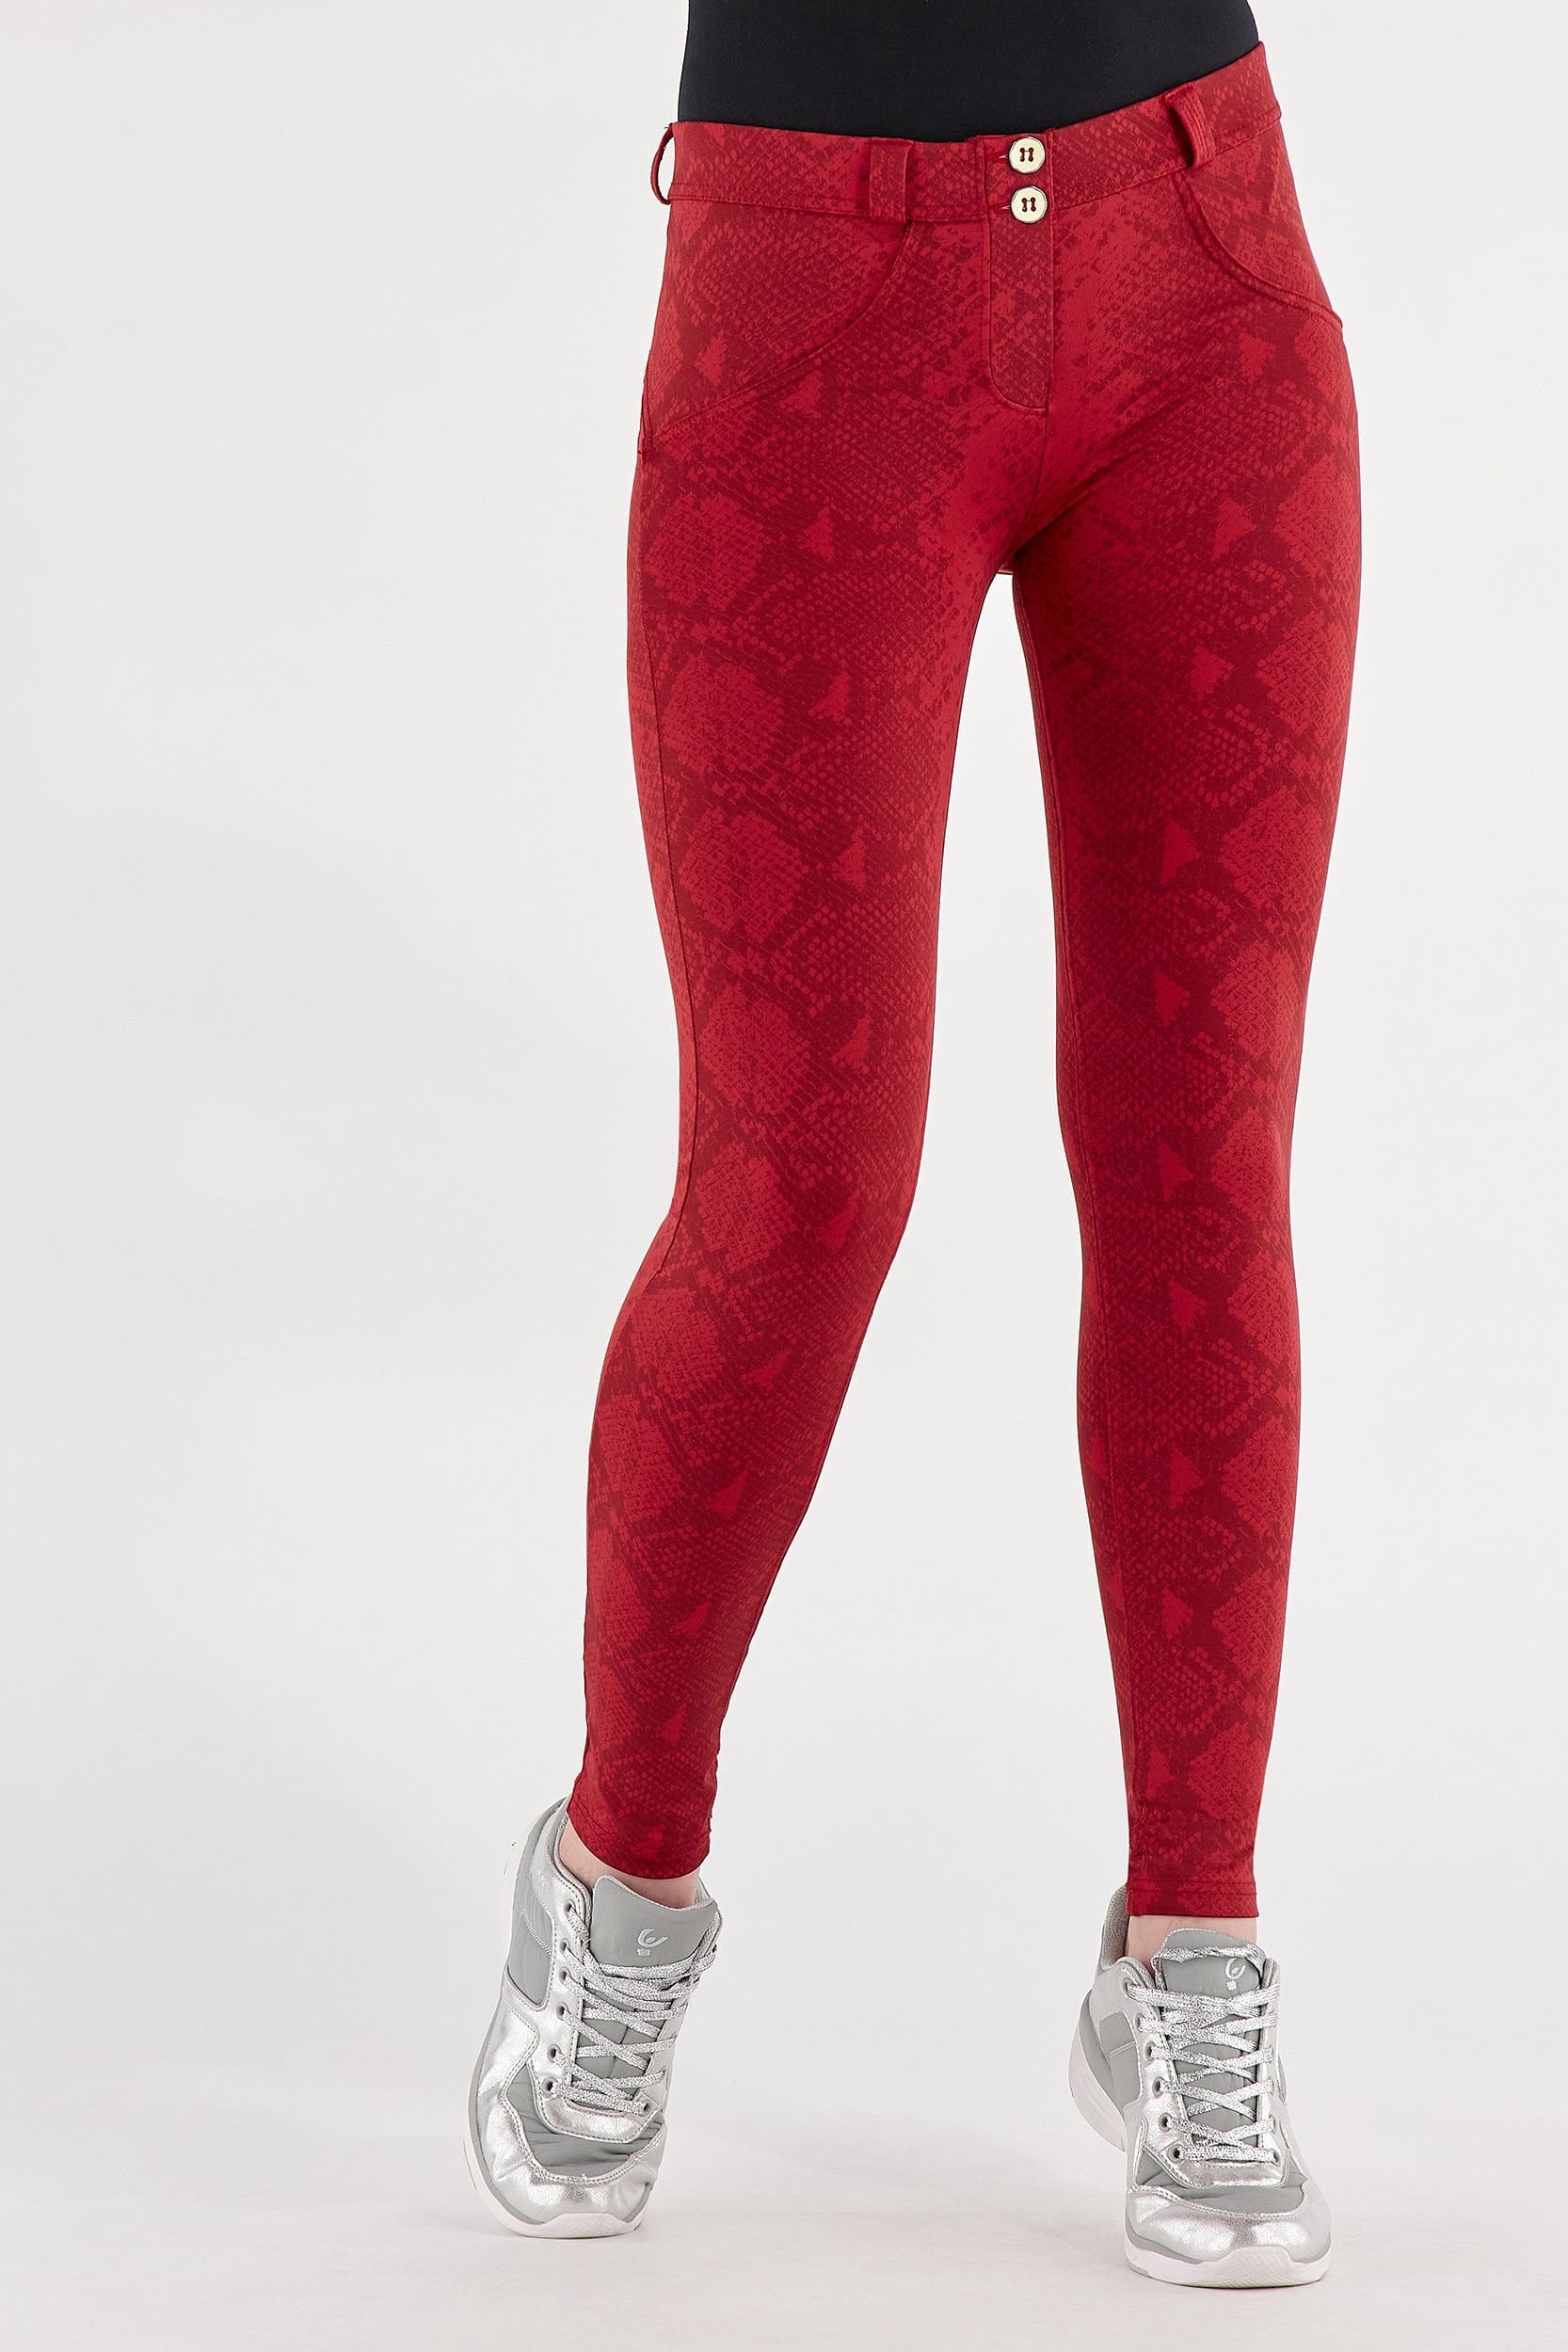 WR.UP® Trousers Diwo Fabric - Mid Waist - Full Length - Red Snake 3